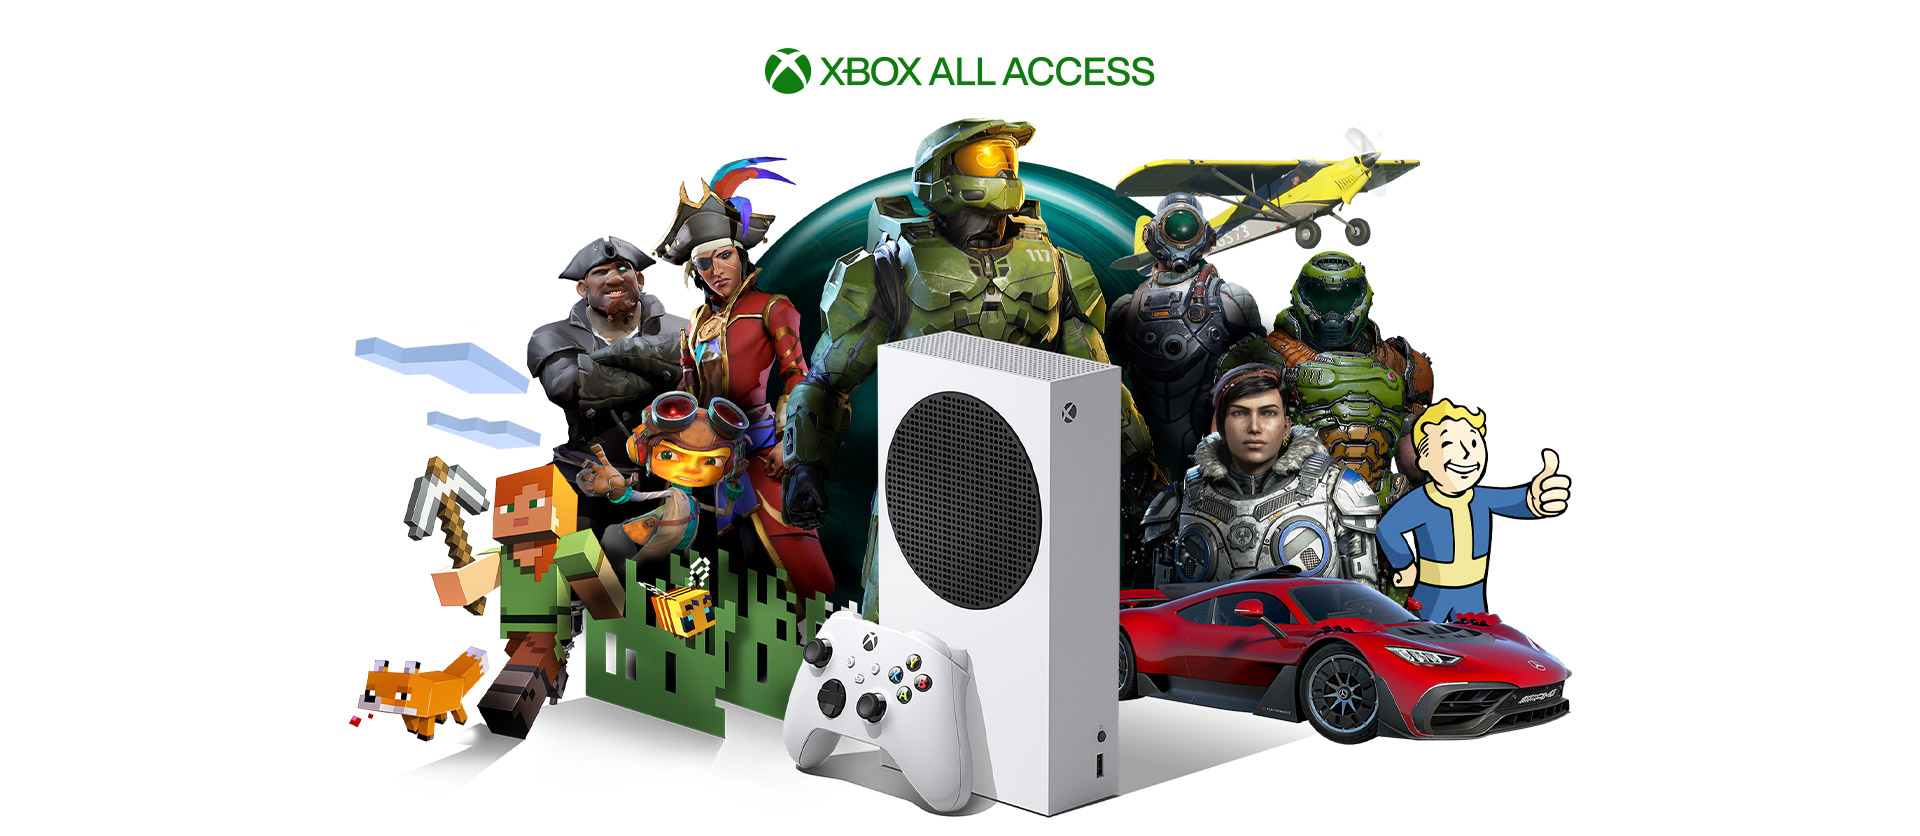 Xbox All Access en Xbox Series S met Xbox-gamepersonages 